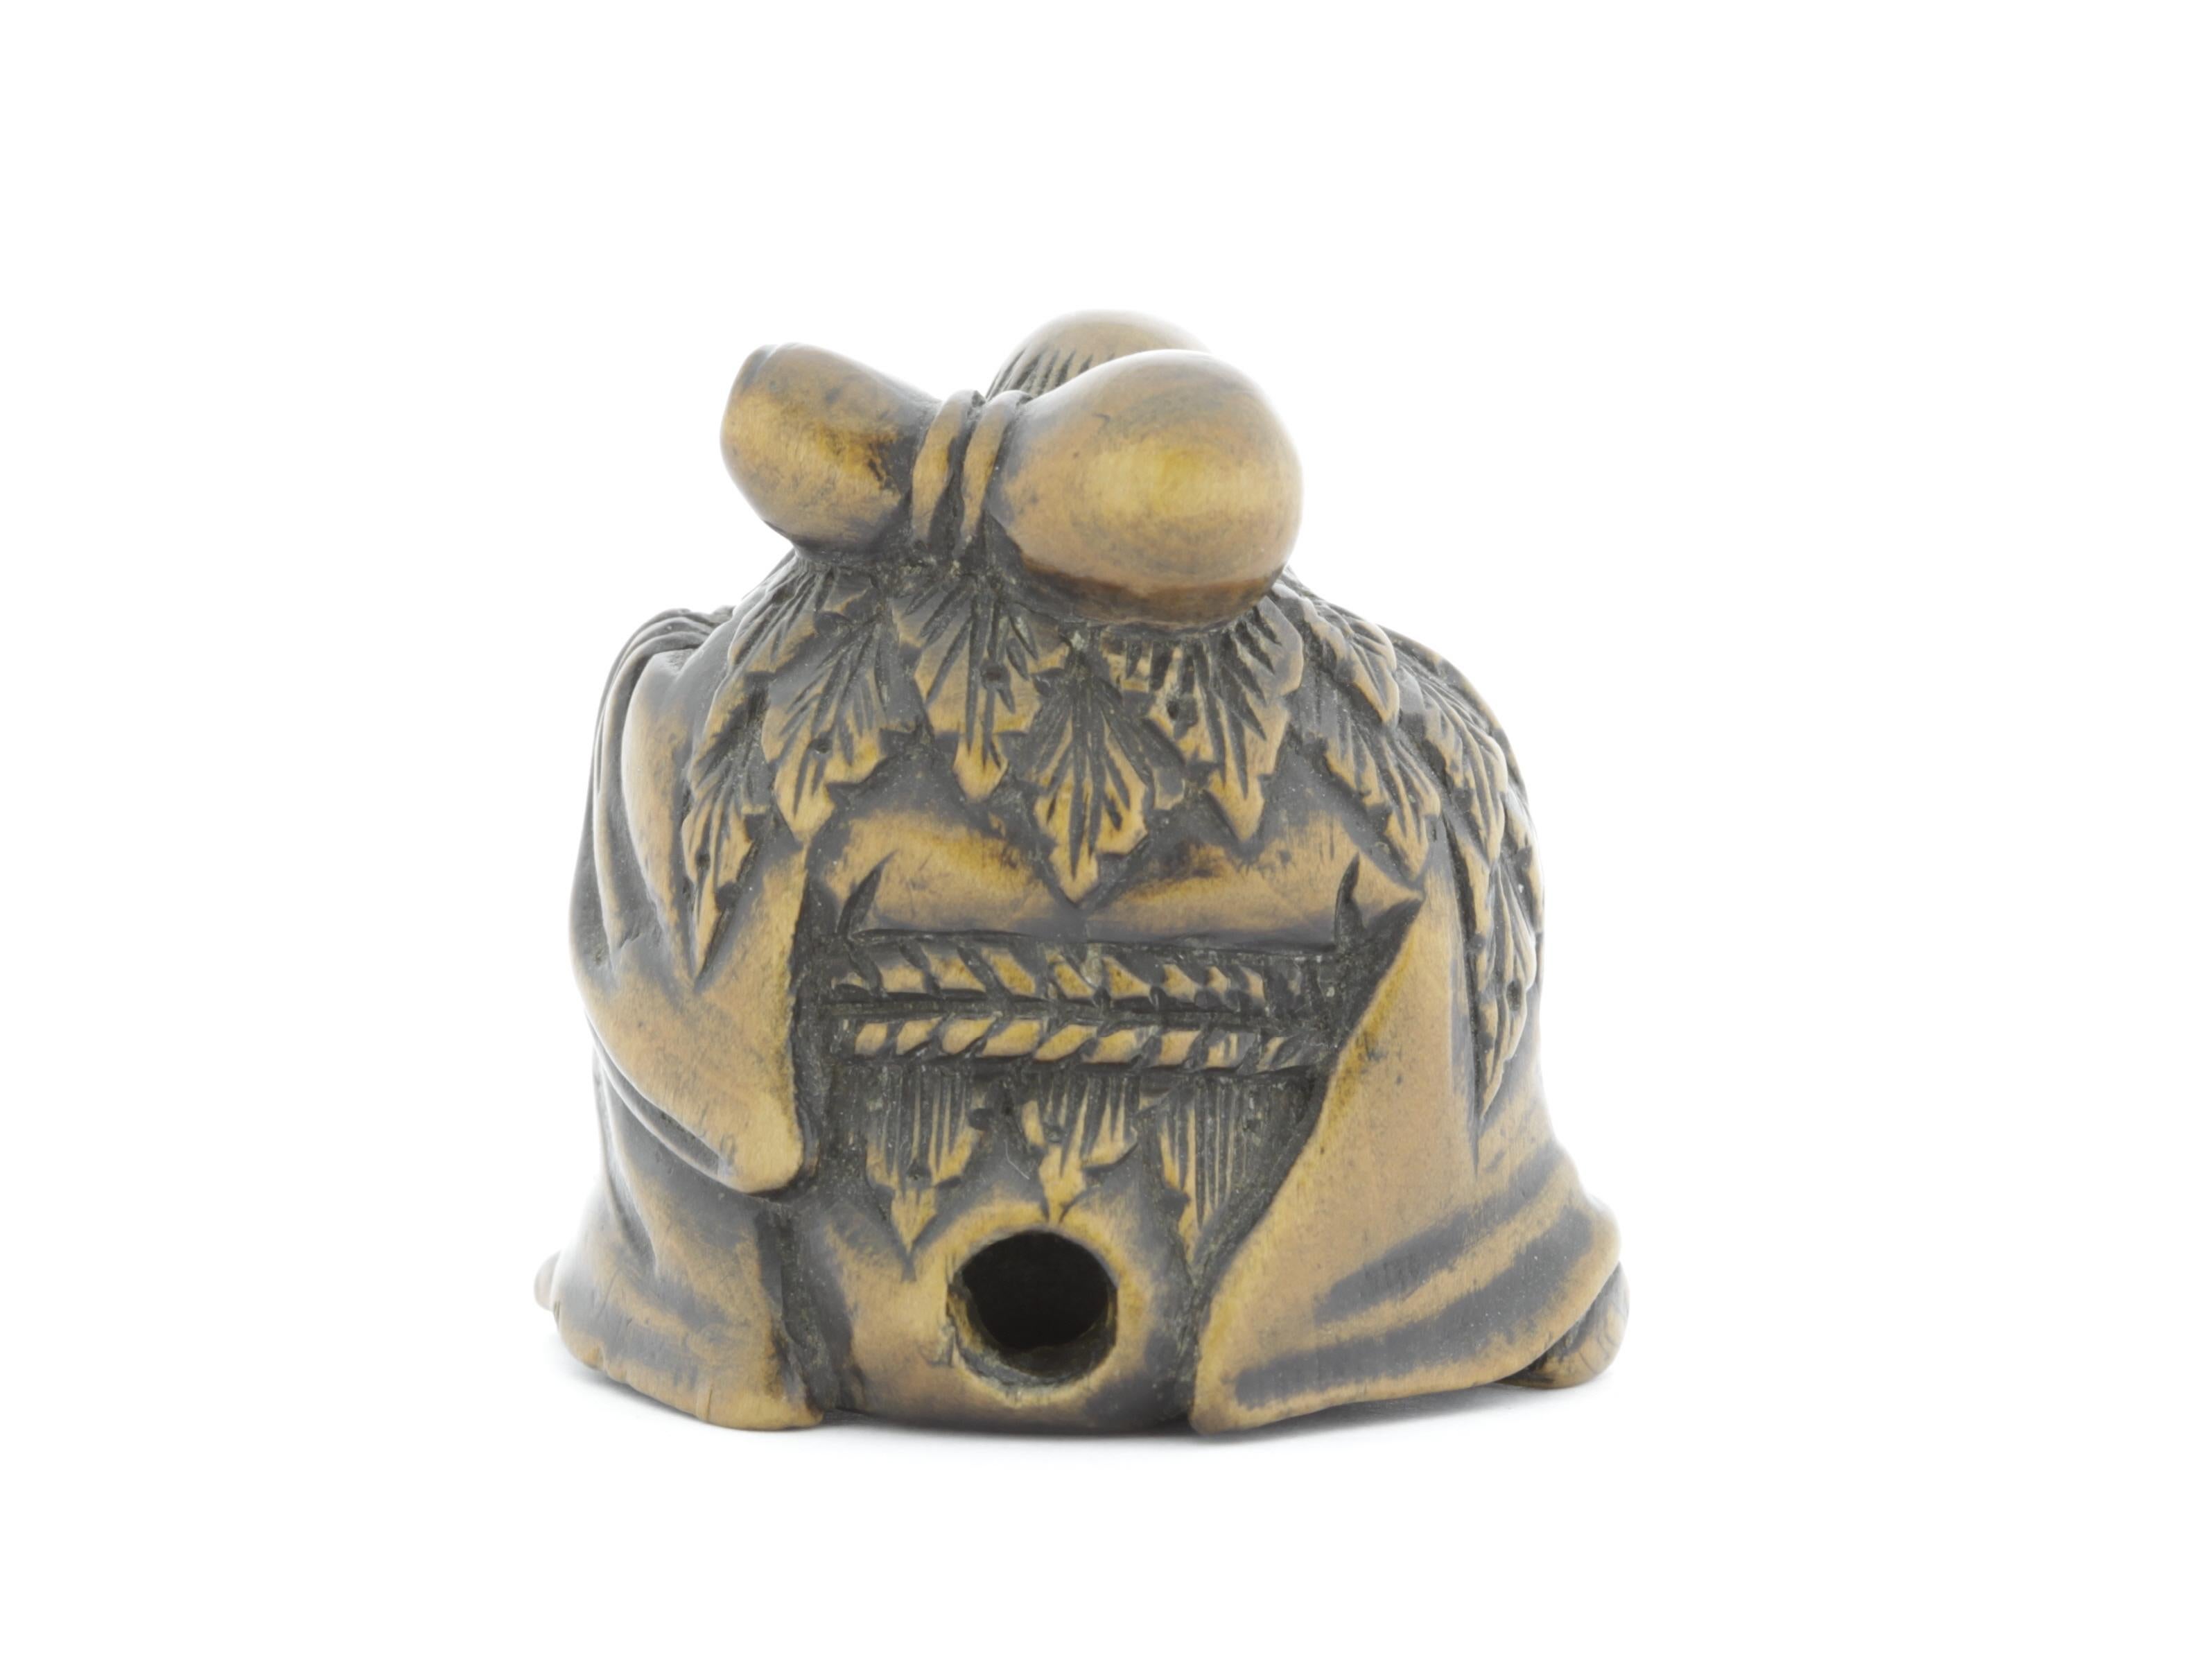 Netsuke, Wood, Accessory, Fashion, 19th century, Antique, Woodcraft, Artisan - Other Art Style Sculpture by Unknown